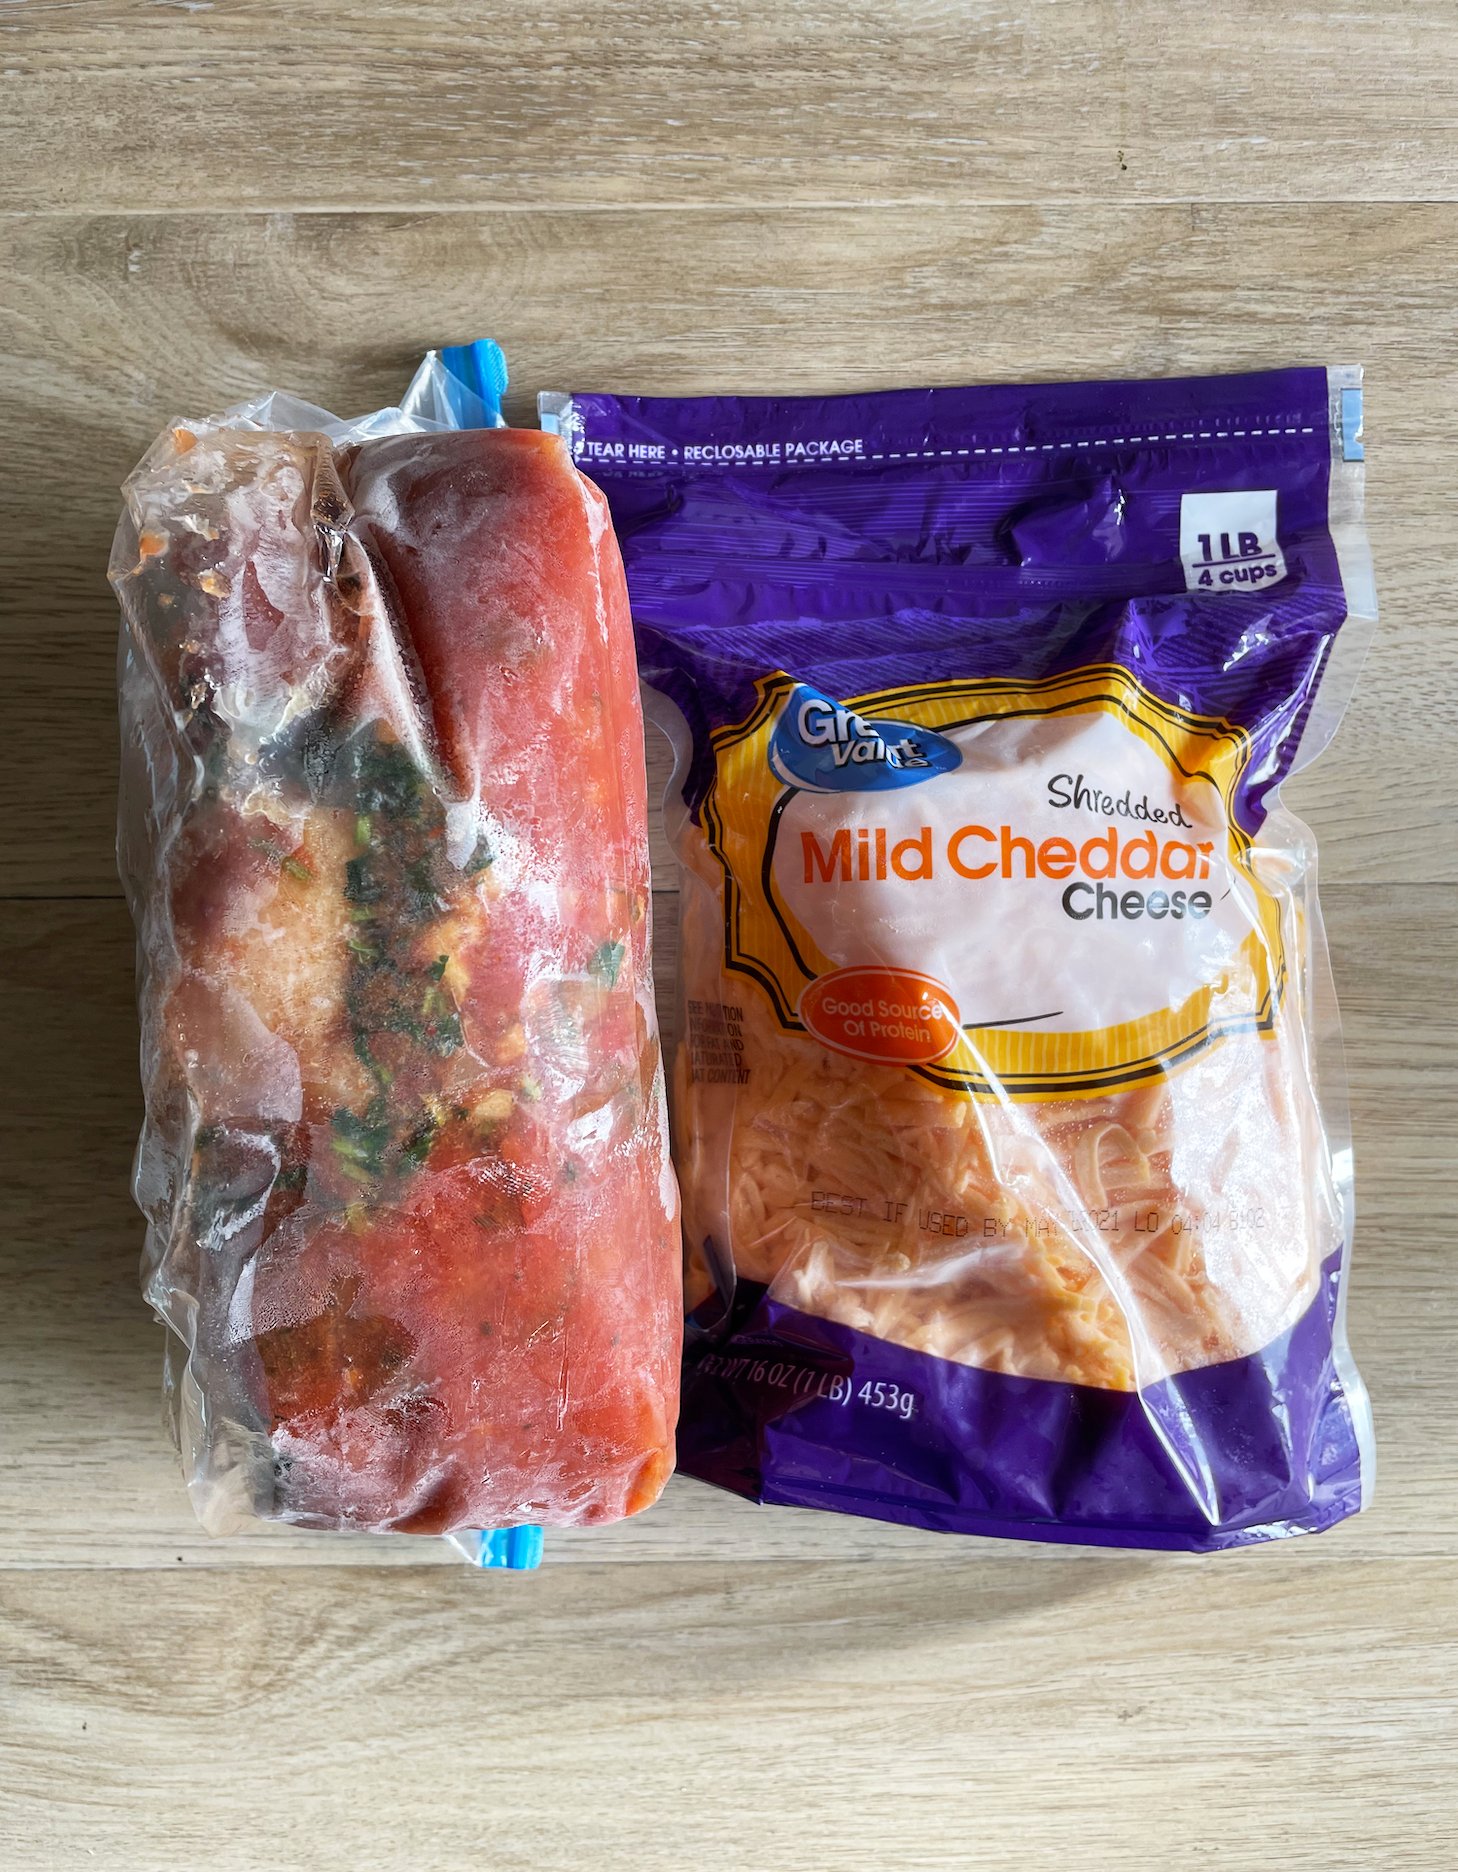 Instant Pot Nachos Freezer Meal with seasonings and meat to be cooked in one freezer bag and cheddar cheese in another.